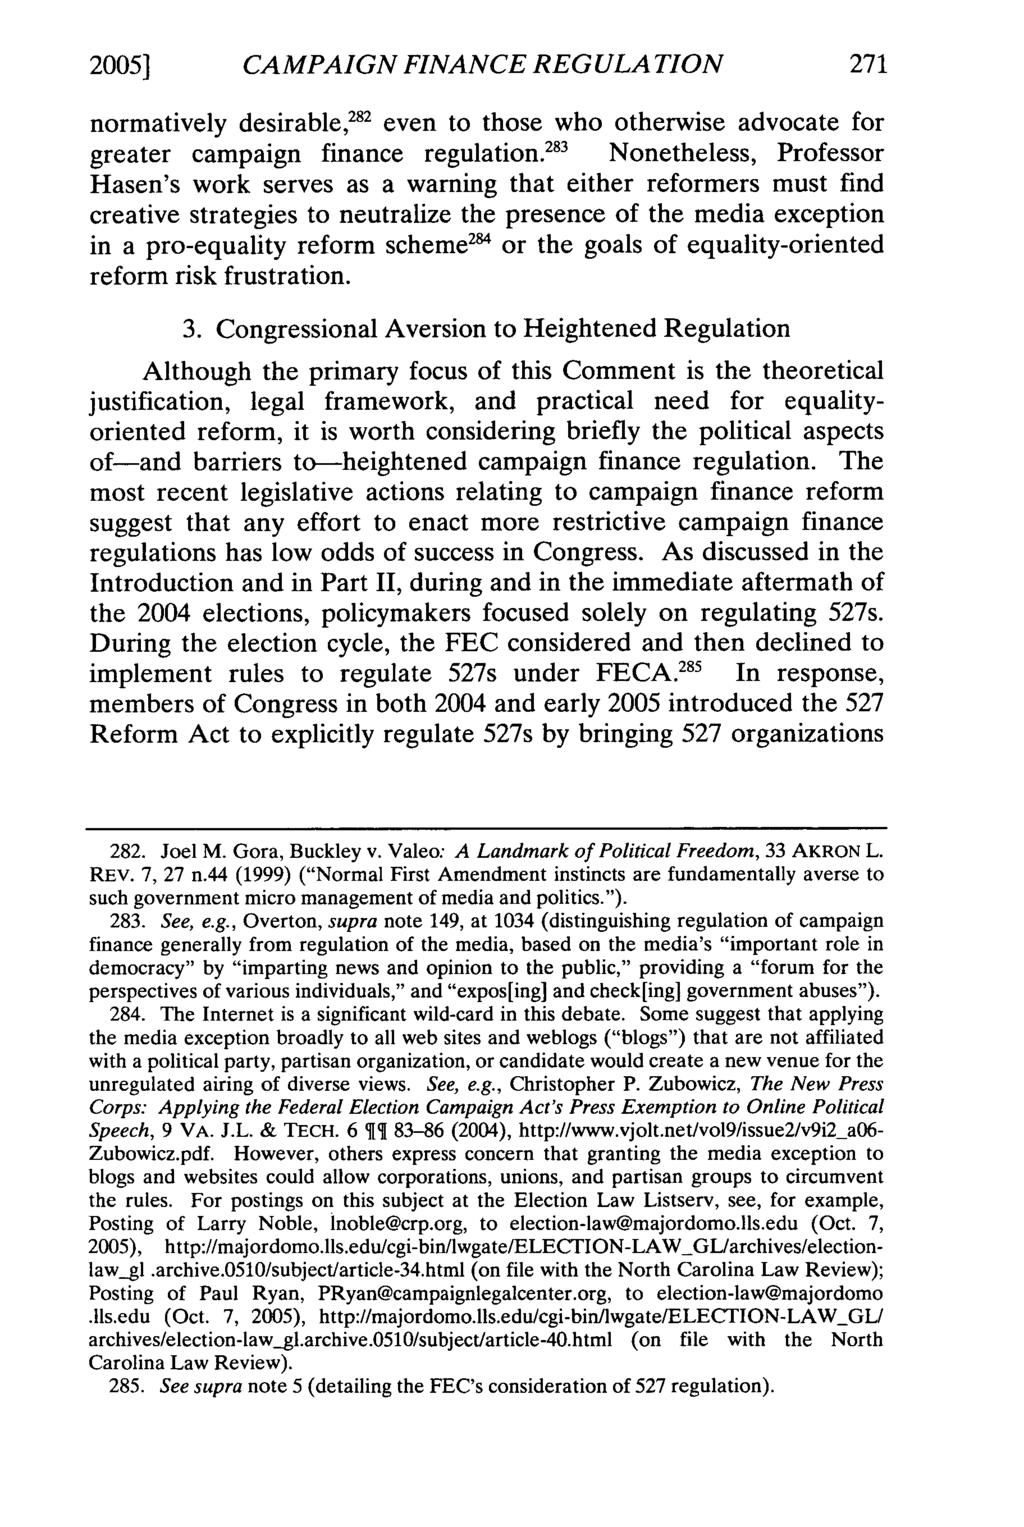 2005] CAMPAIGN FINANCE REGULATION normatively desirable, 282 even to those who otherwise advocate for greater campaign finance regulation.